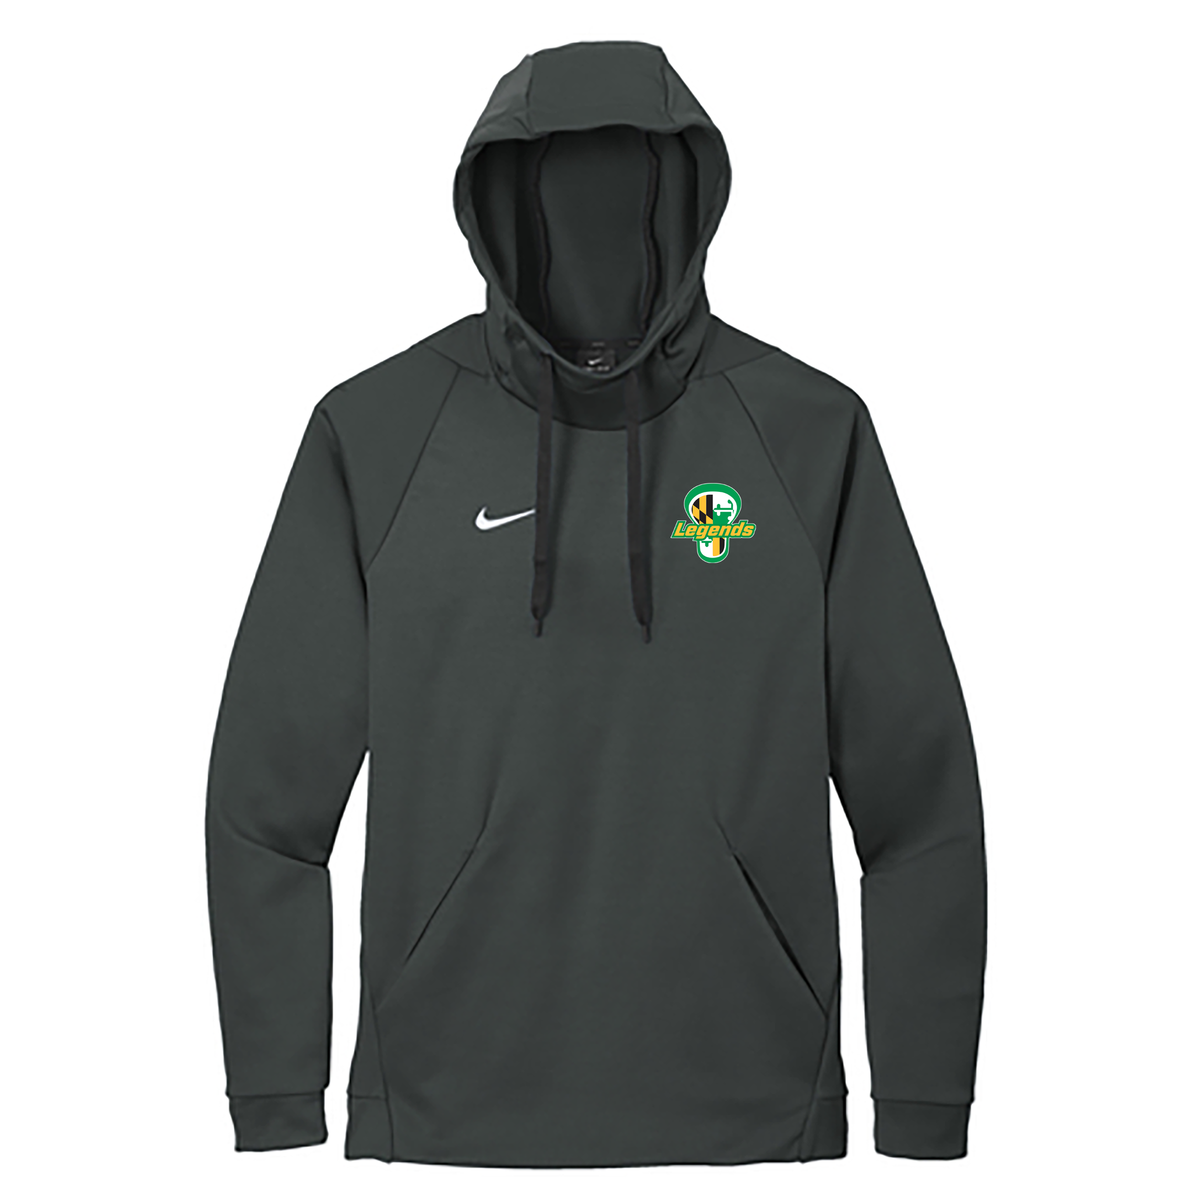 Legends Lacrosse Nike Therma-FIT Embroidered Hoodie